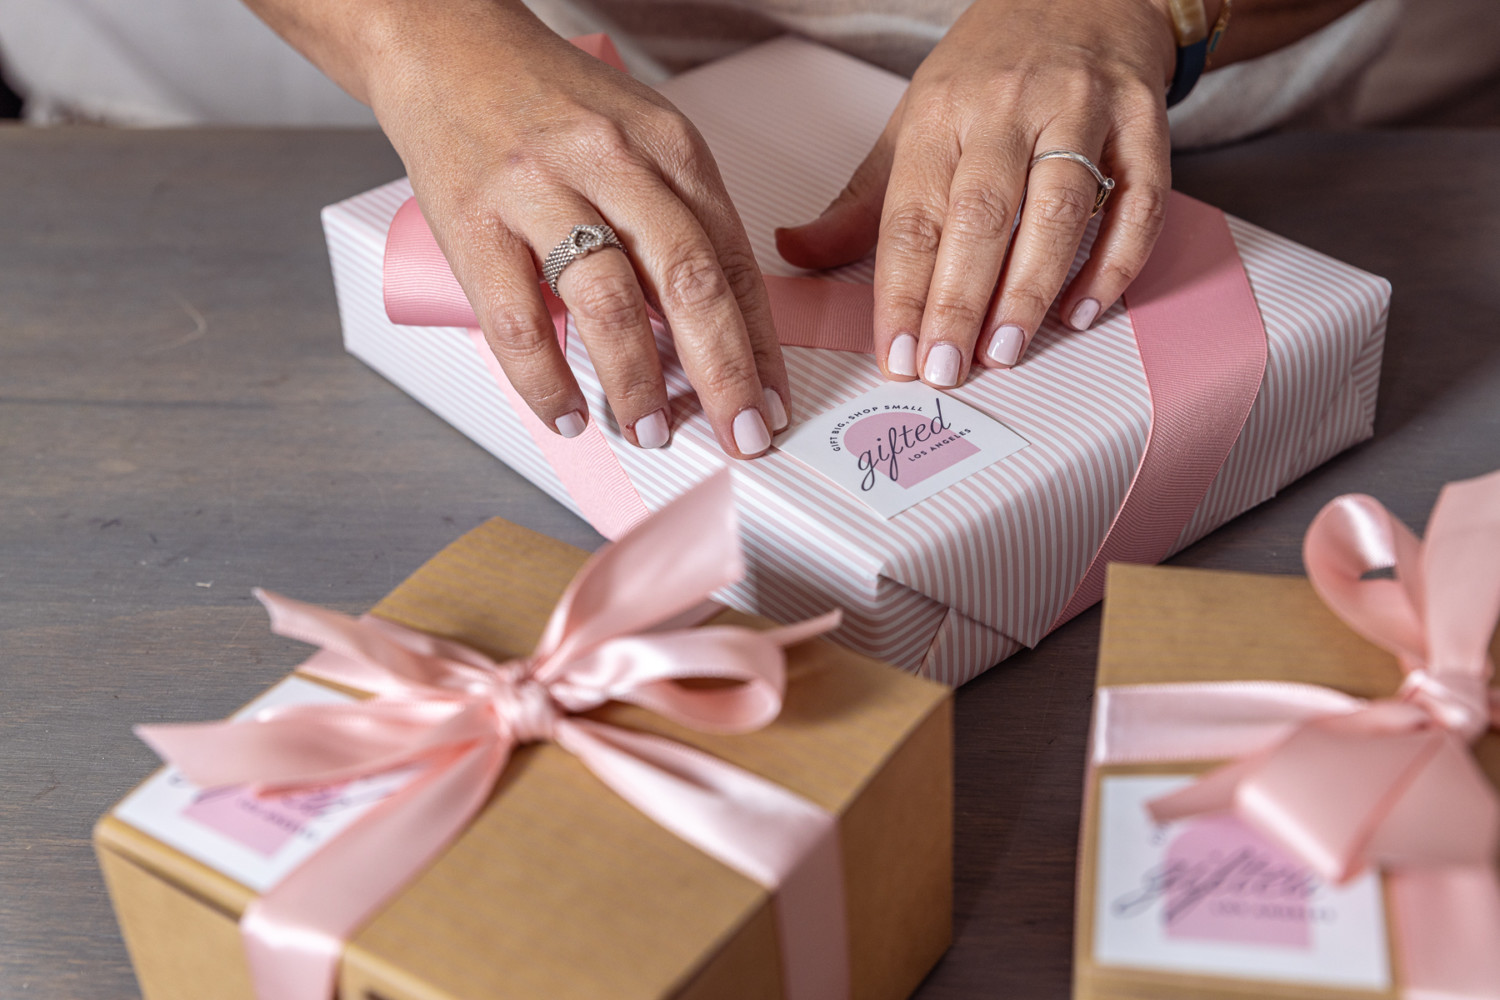 Hands preparing pink gift boxes with paper cards for the Gifted LA September shoot.